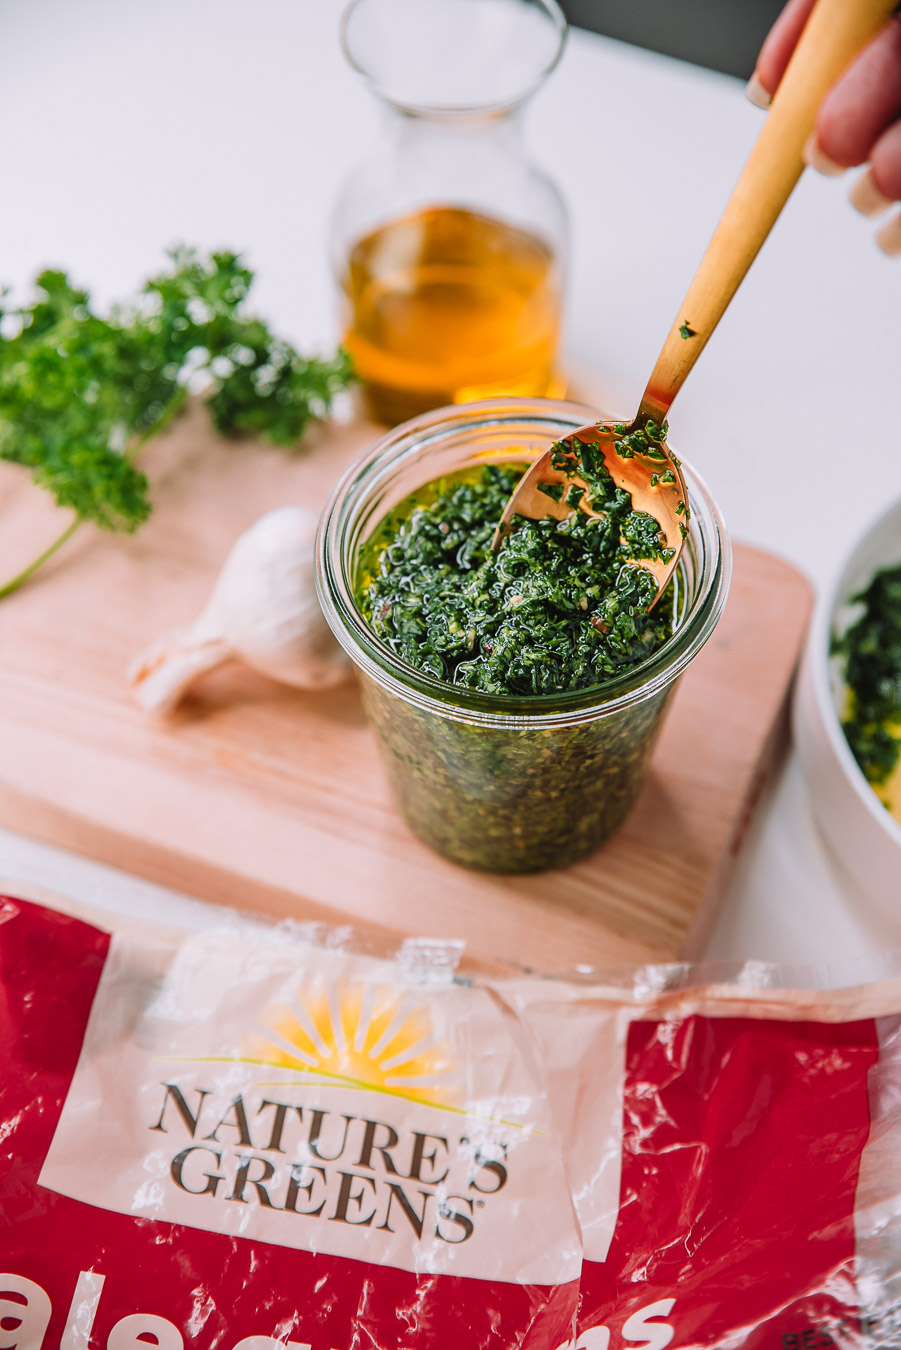 Kale Chimichurri Sauce made with Nature's Greens Kale.